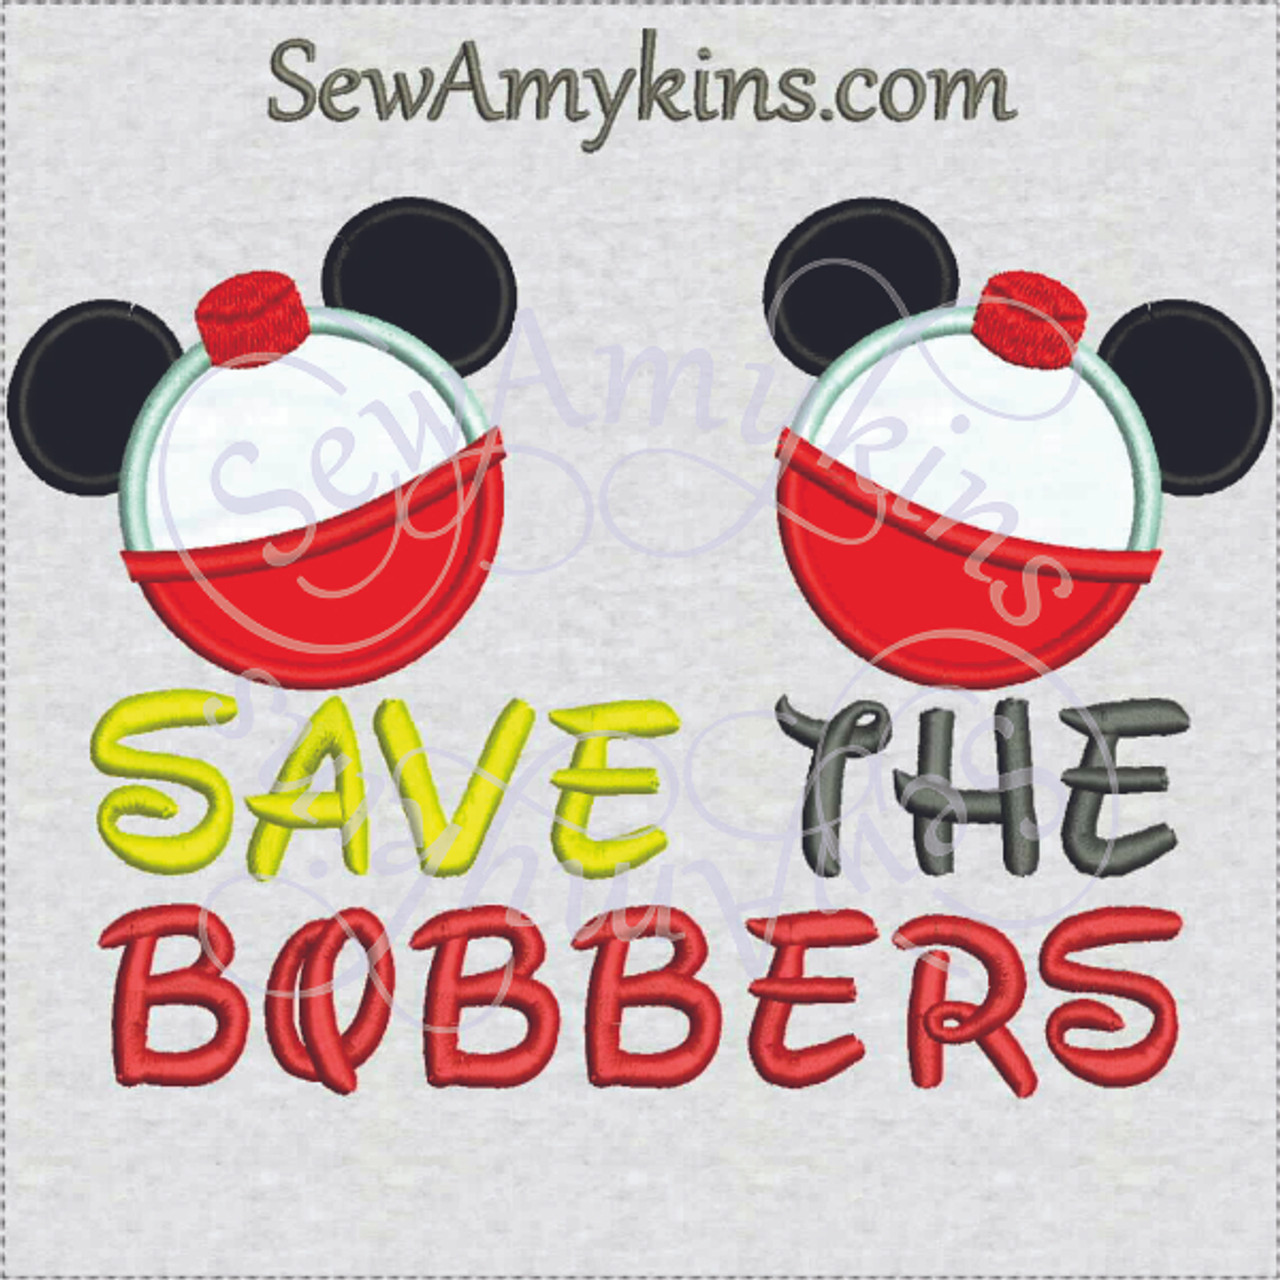 https://cdn11.bigcommerce.com/s-pb2mey/images/stencil/1280x1280/products/688/3253/Mickey_mouse_save_the_bobbers_fishing_bobber_applique_embroidery__56457.1403659644.JPG?c=2